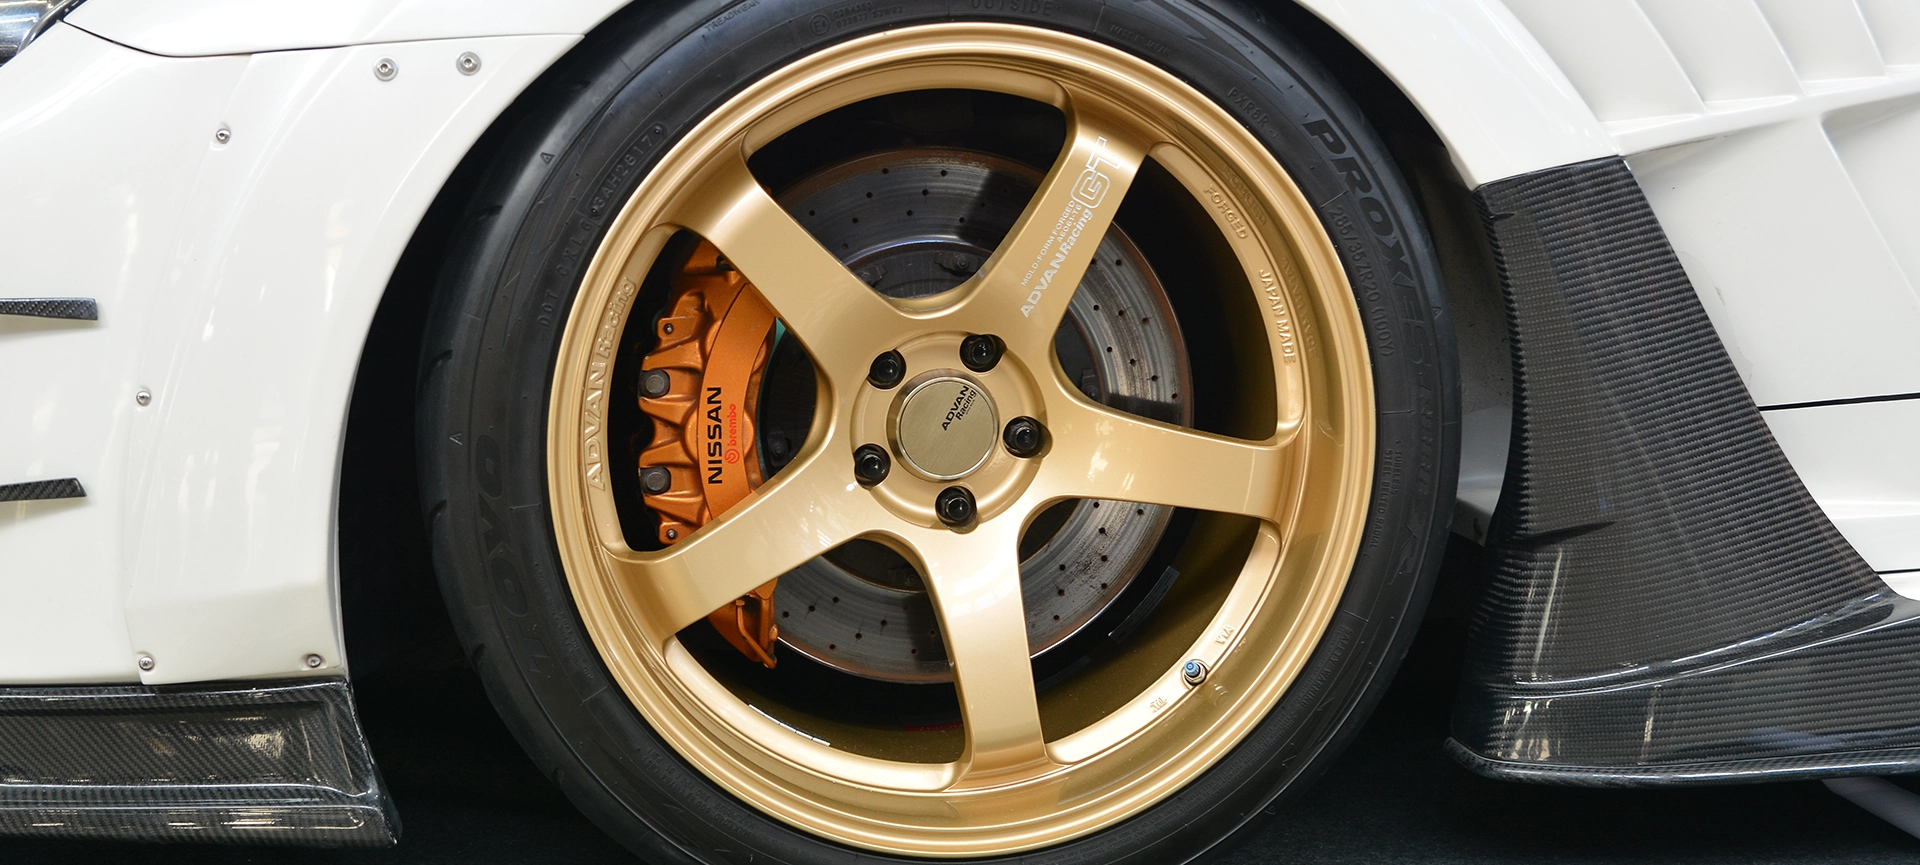 A Guide to Perfection: How to Choose the Right Powder Coating Color for Your Rims